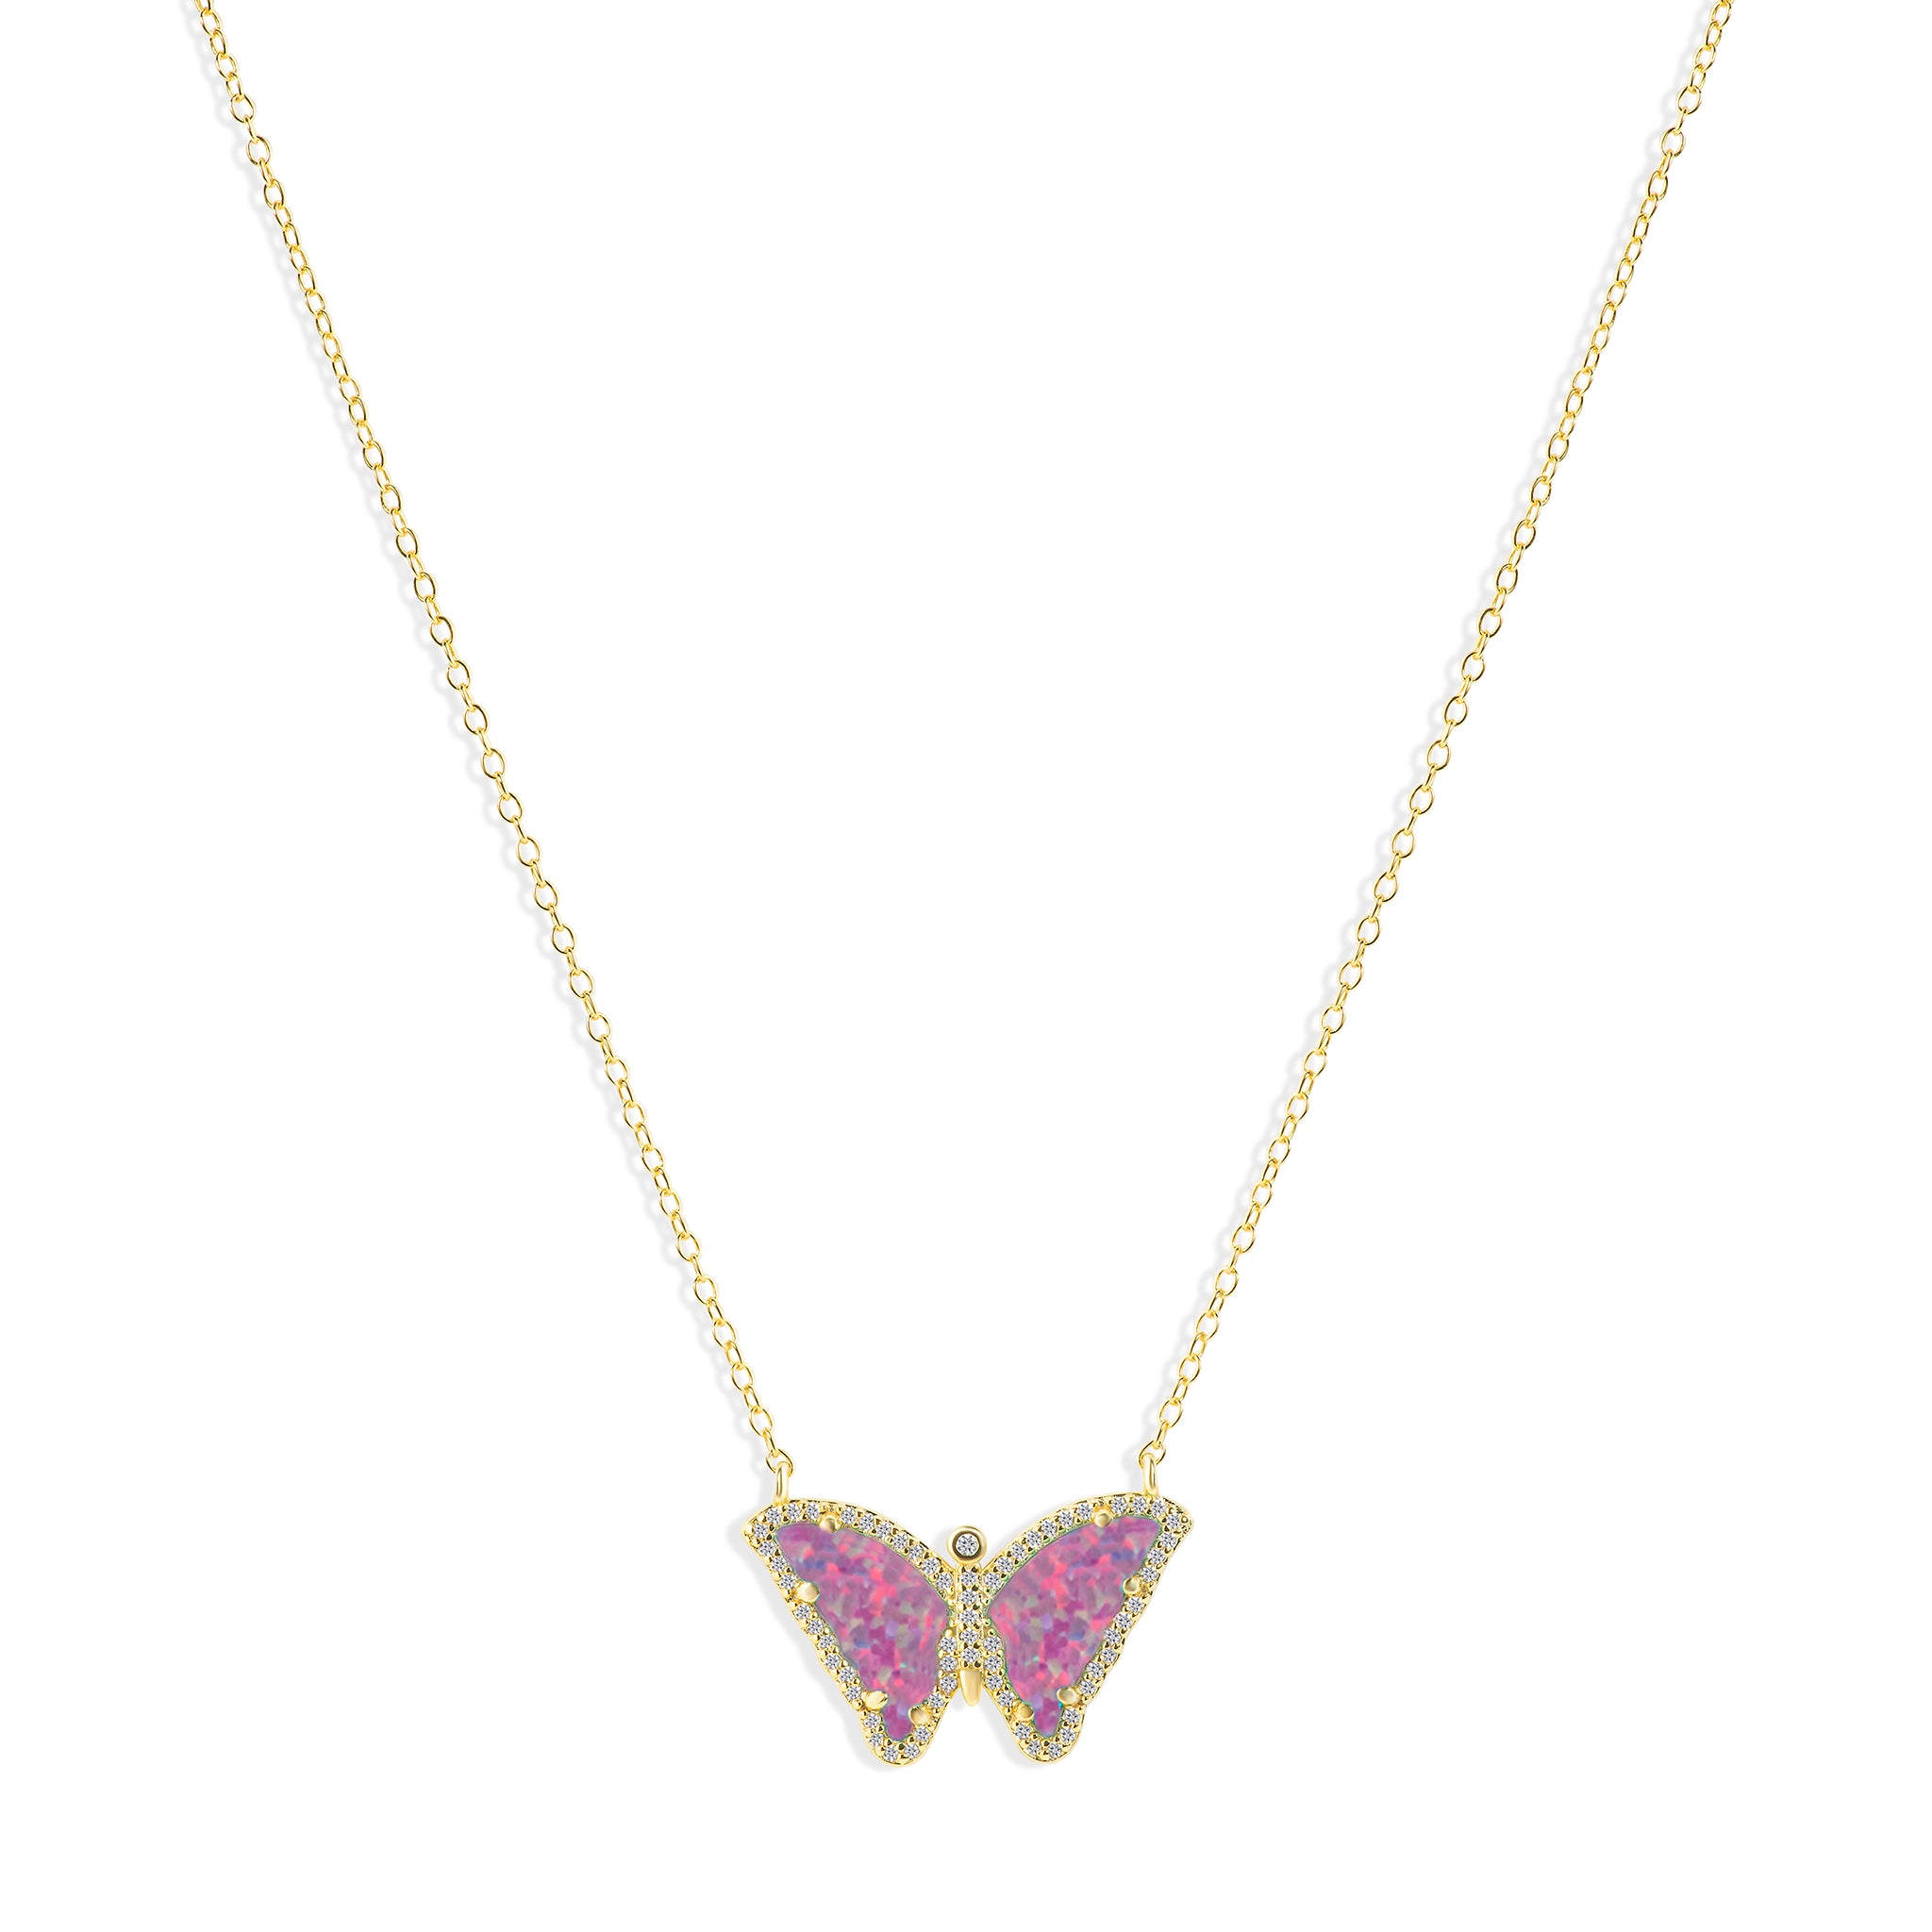 Isabella Classic Butterfly Necklace N315 in Gold Plating